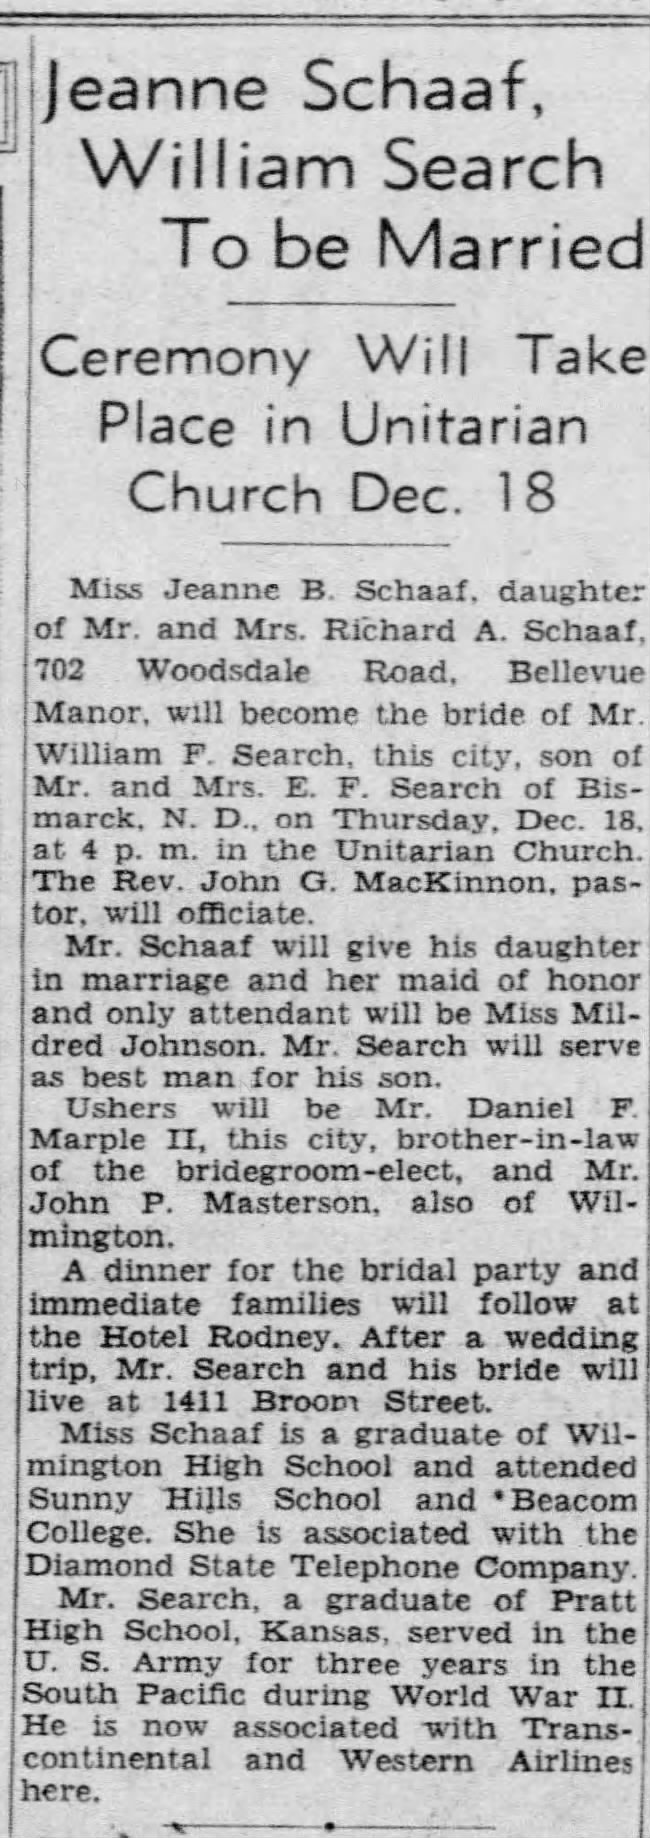 Marriage Announcement - Jeanne Schaaf to William Search